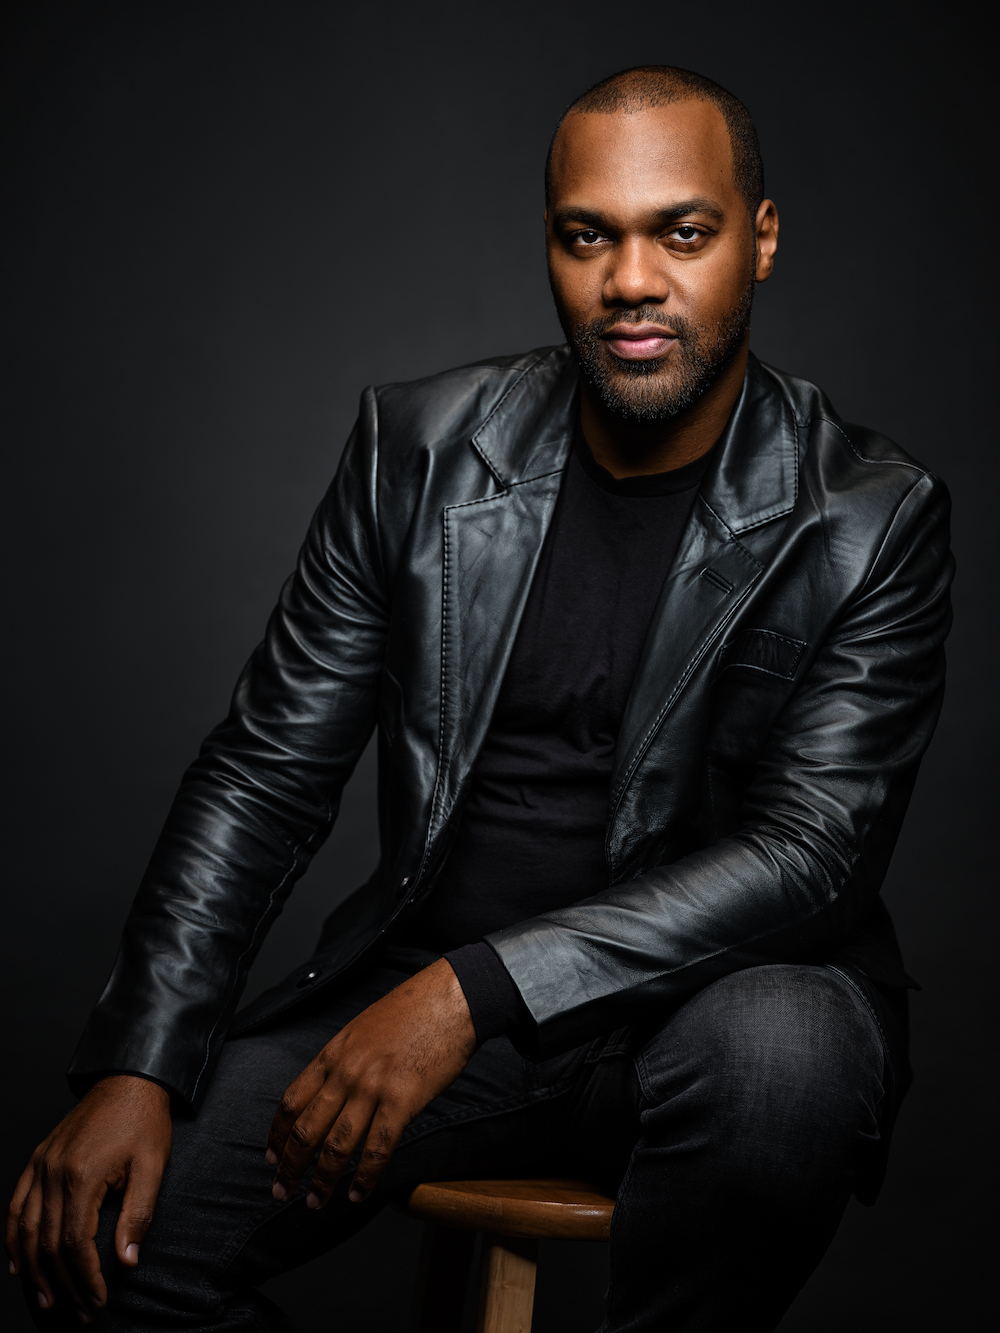 Pierre Walters, Co-founder of Brand Desk, Launches Business in Action Magazine and Joins an Esteemed Lineup of Speakers at the Women of Good Works "Keys to Success" Event